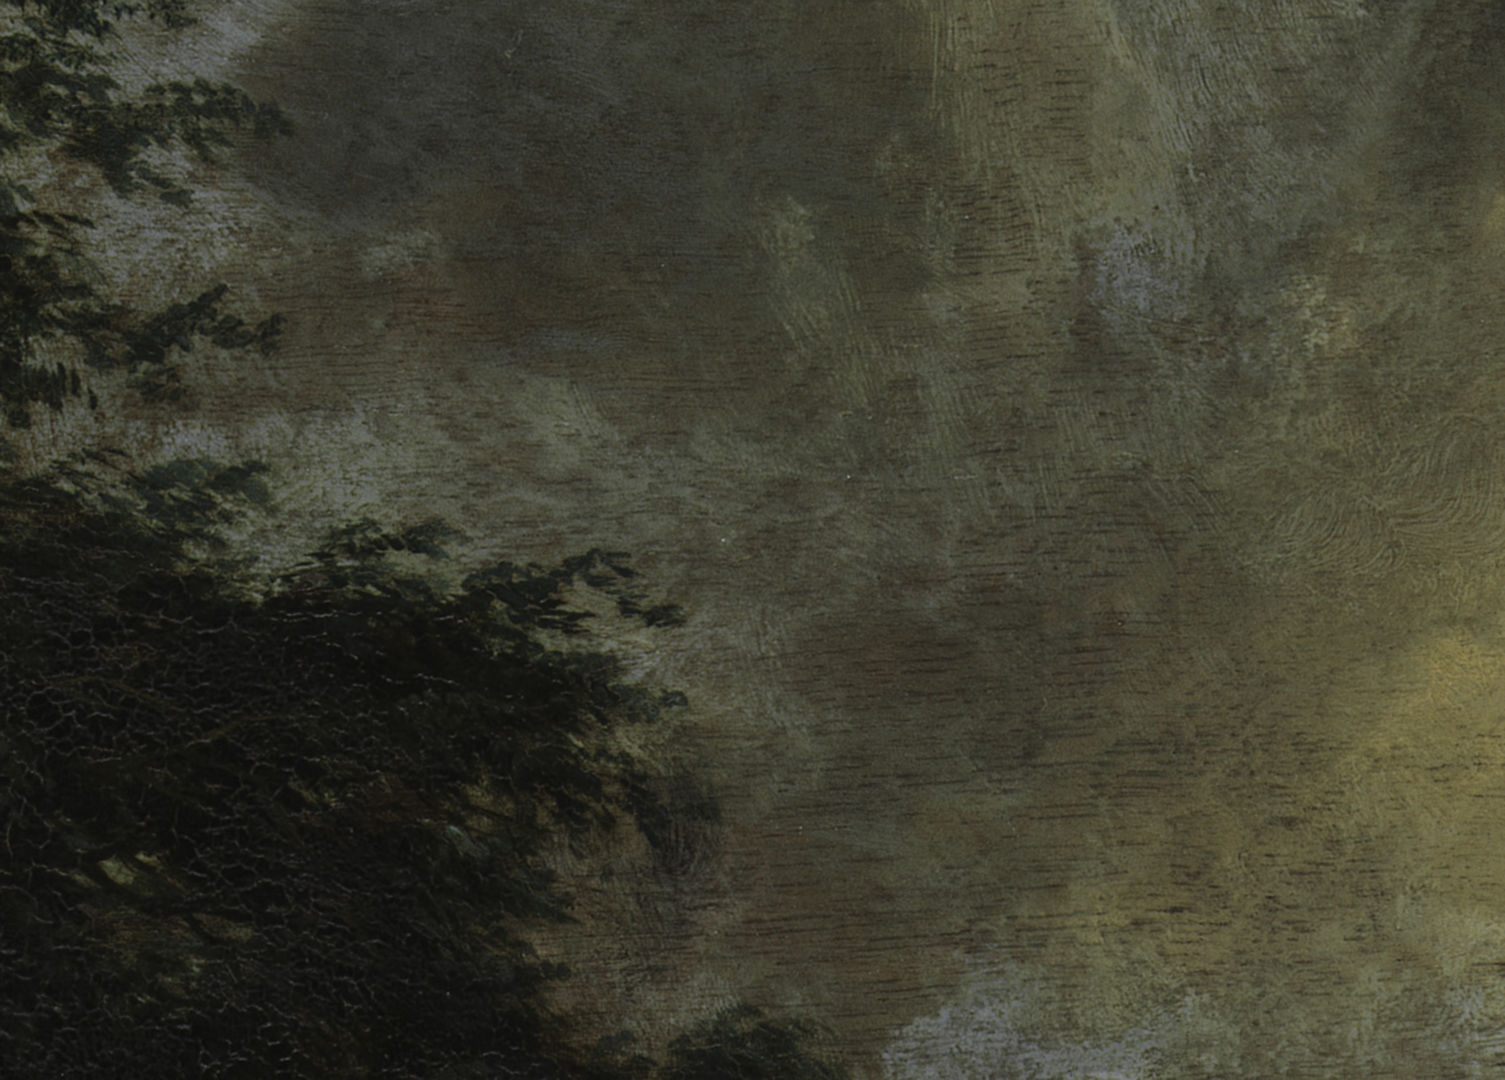 Fig. 4. Detail from Meyndert Hobbema, Village Among Trees, 1655. The Frick Collection, New York, Henry Clay Frick Bequest (1902.1.73). This detail, before treatment, shows the transparency caused by soap formation that makes the dark pores of the wood grain visible.